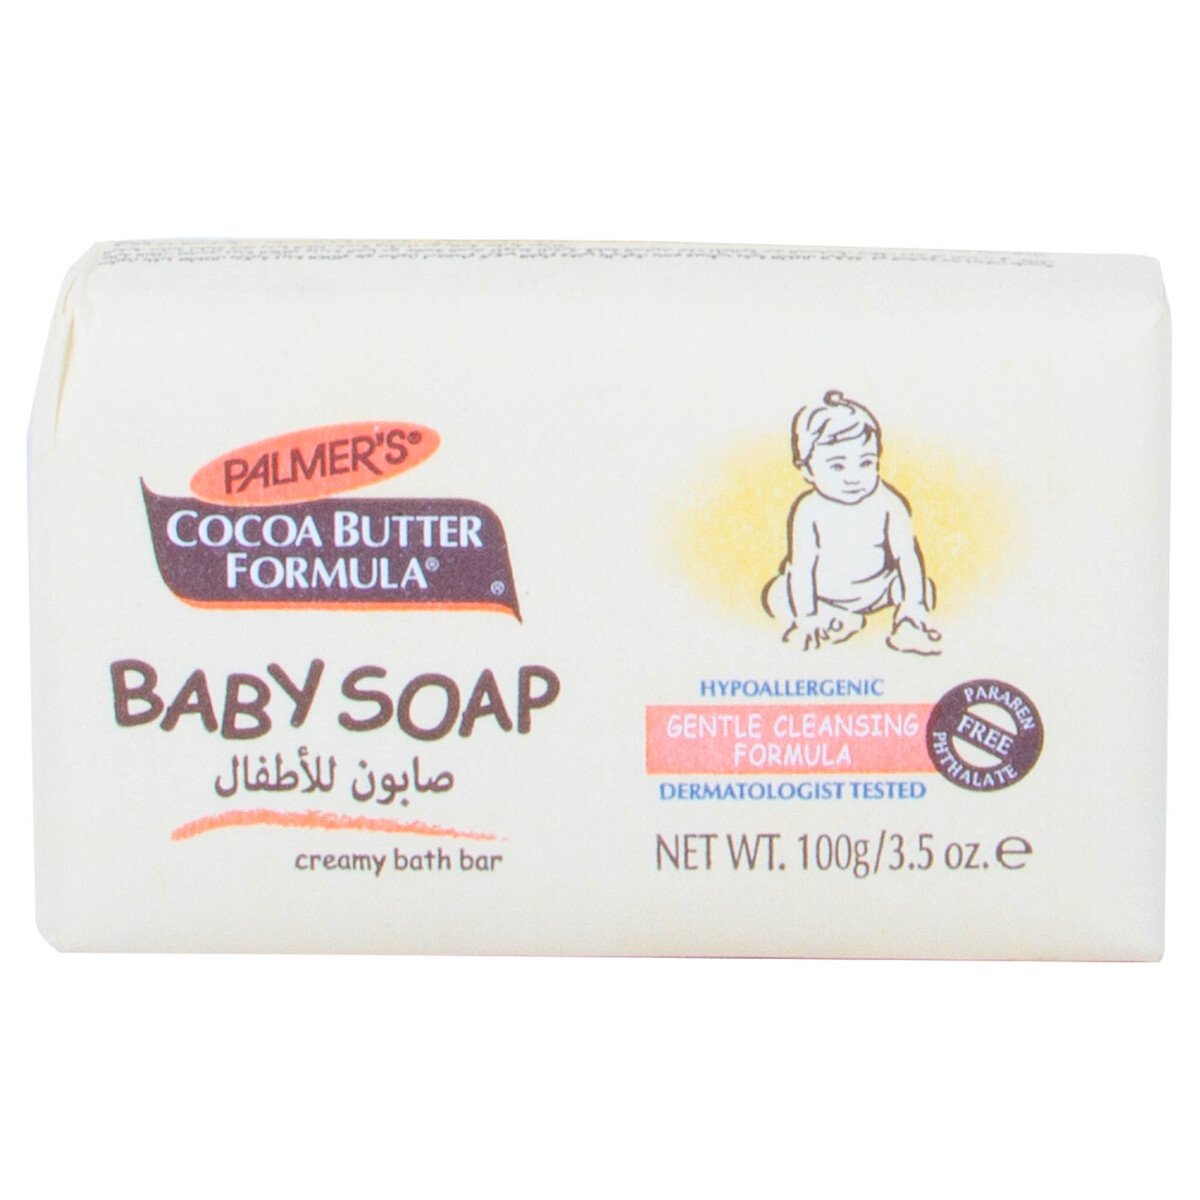 Palmer's Baby Soap Cocoa Butter Formula 100 g